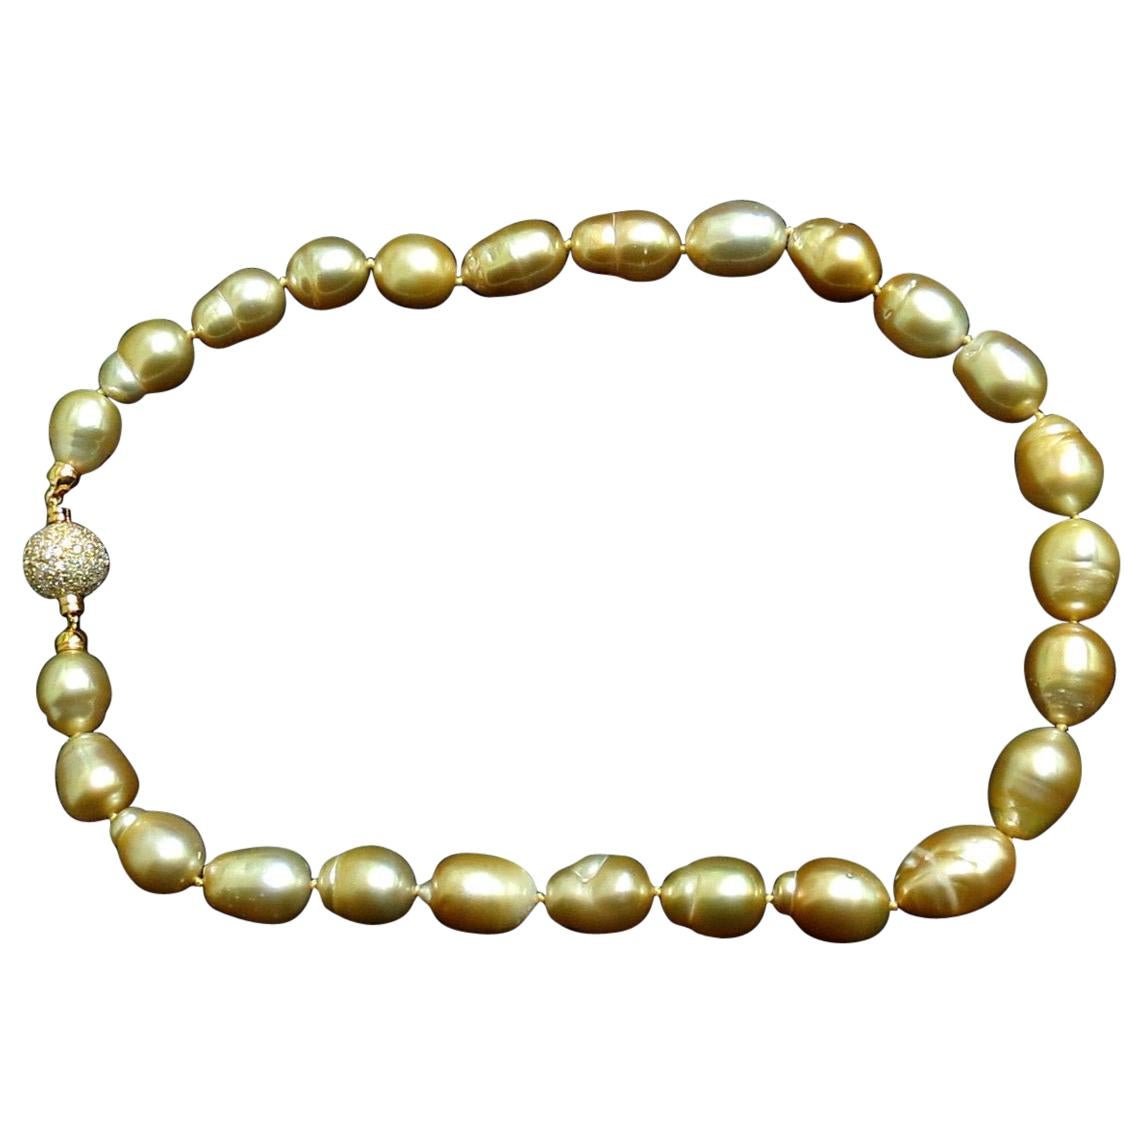 18 Karat Natural South Sea Yellow Pearls Necklace 2.00 Carat Diamond Clasp For Sale